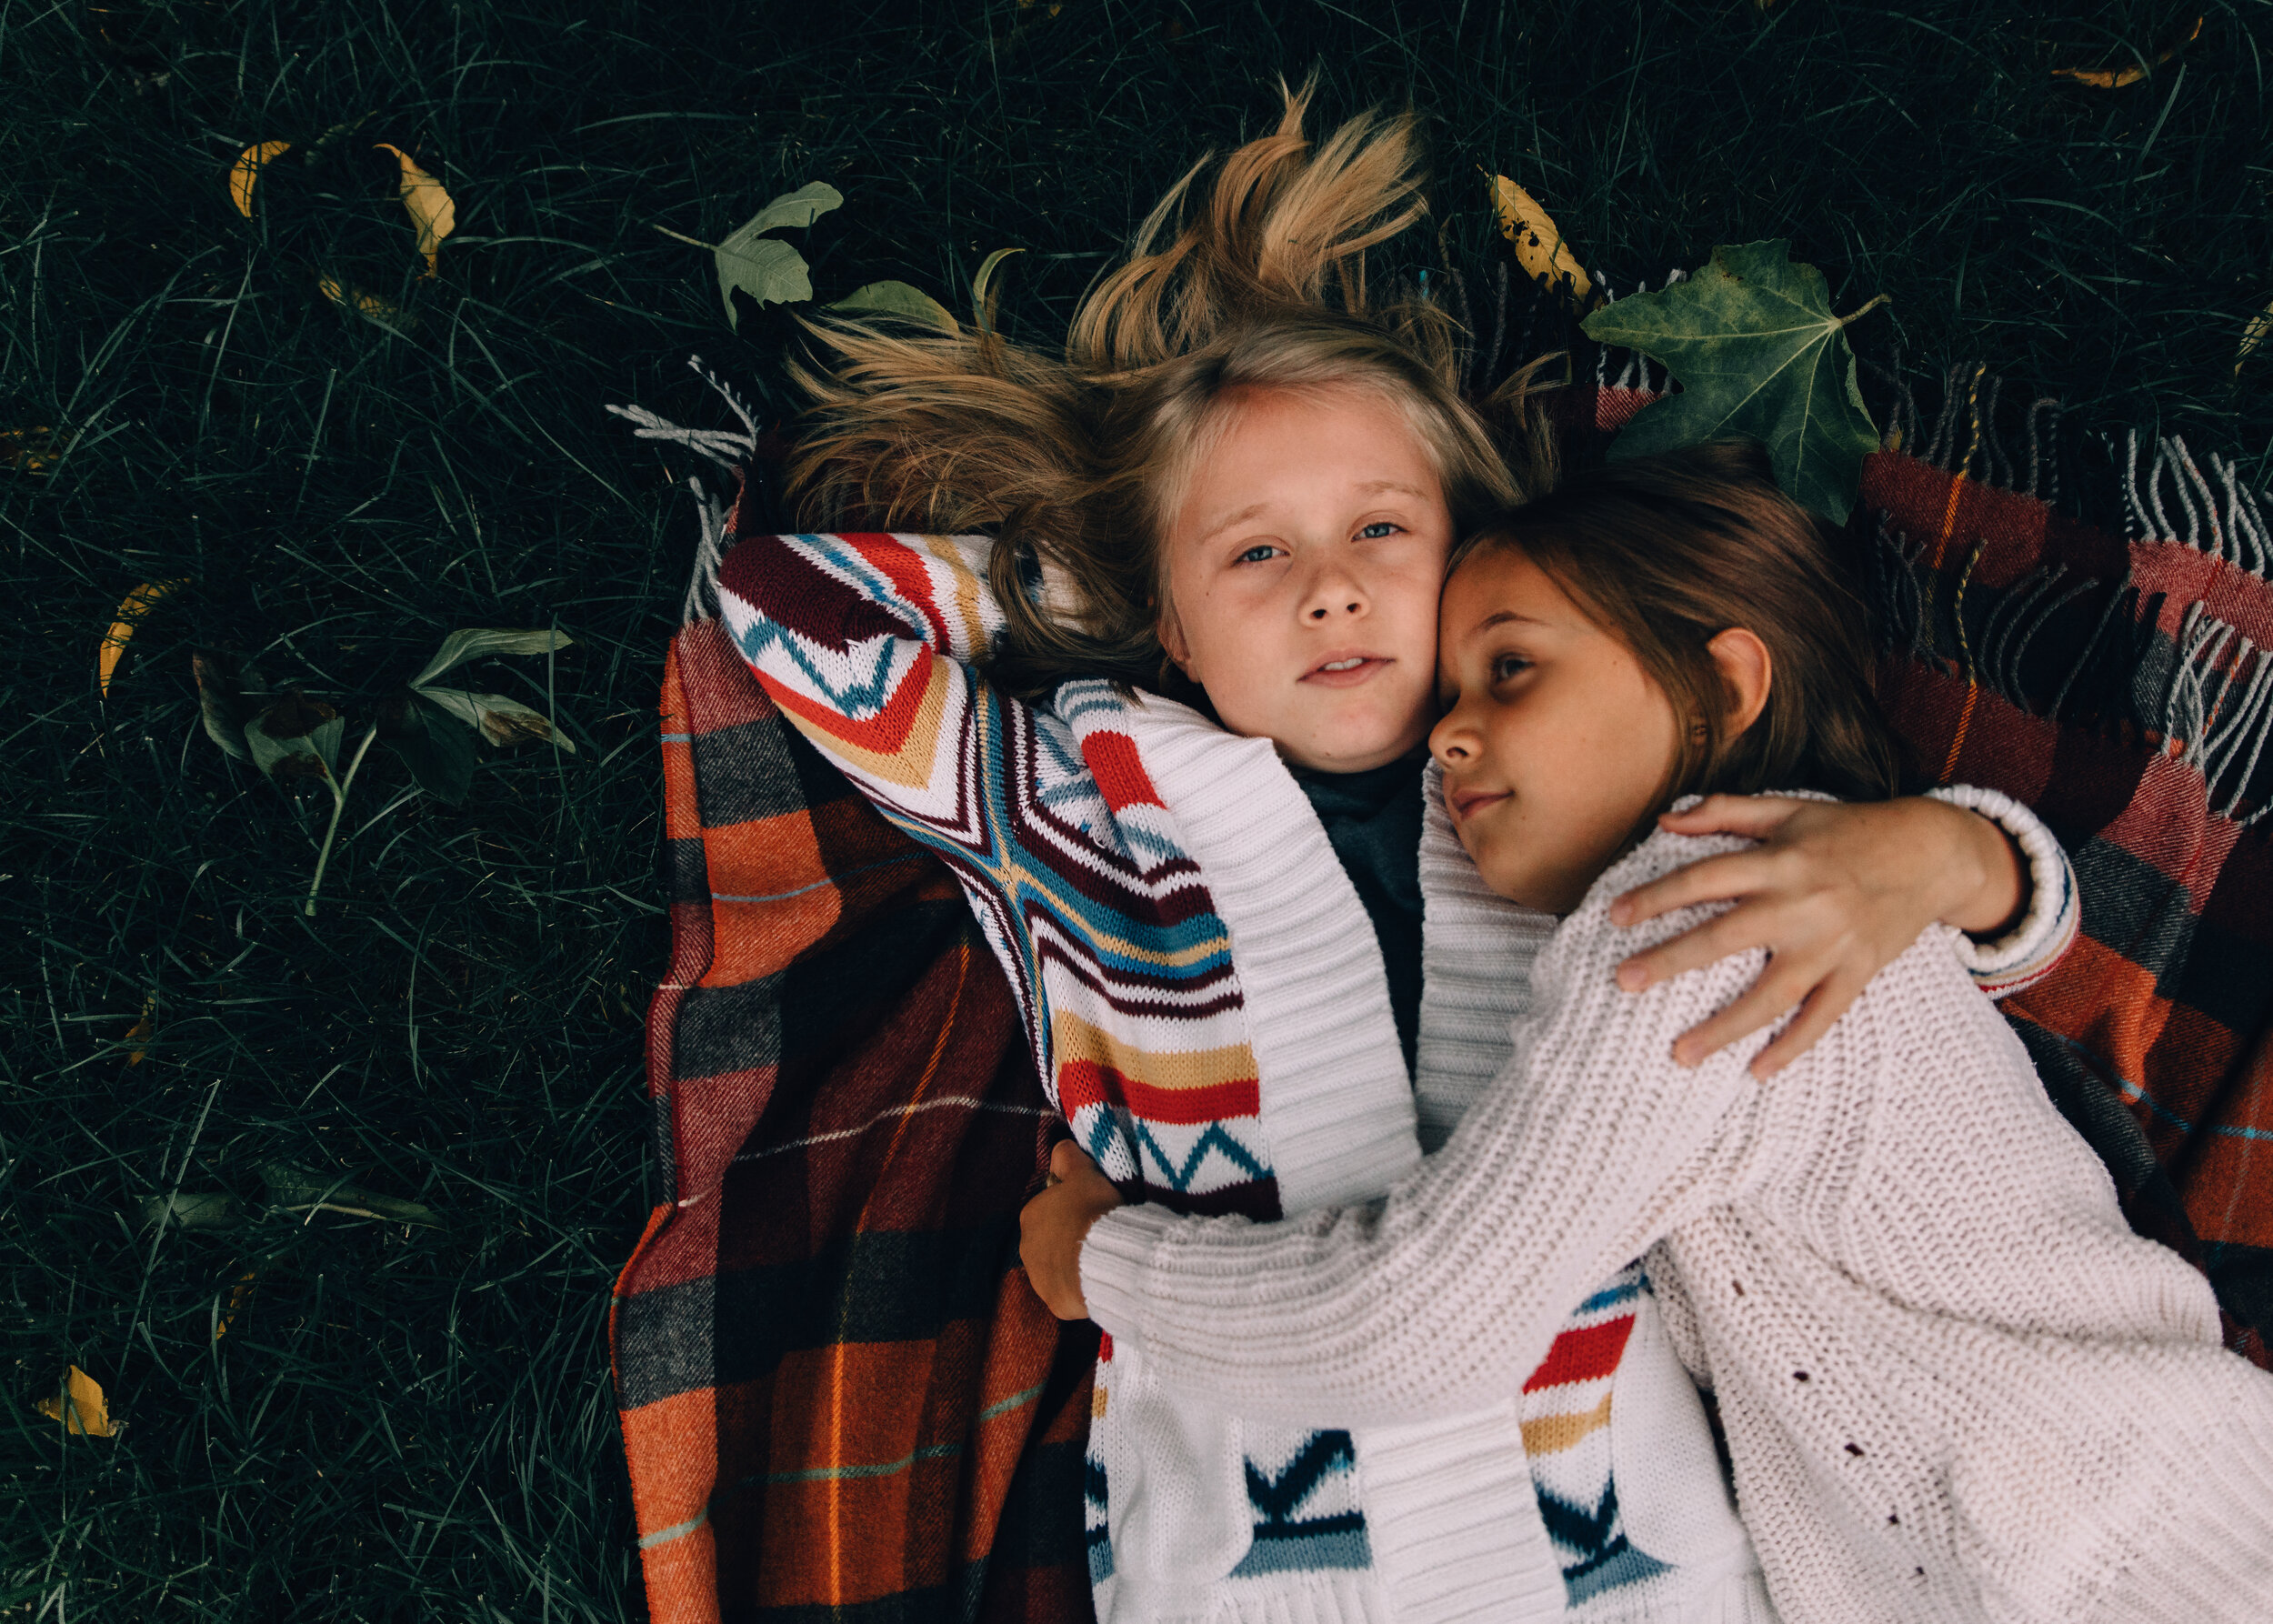 greta and stella on blanket in the fall 18 for printto print 2018.JPG